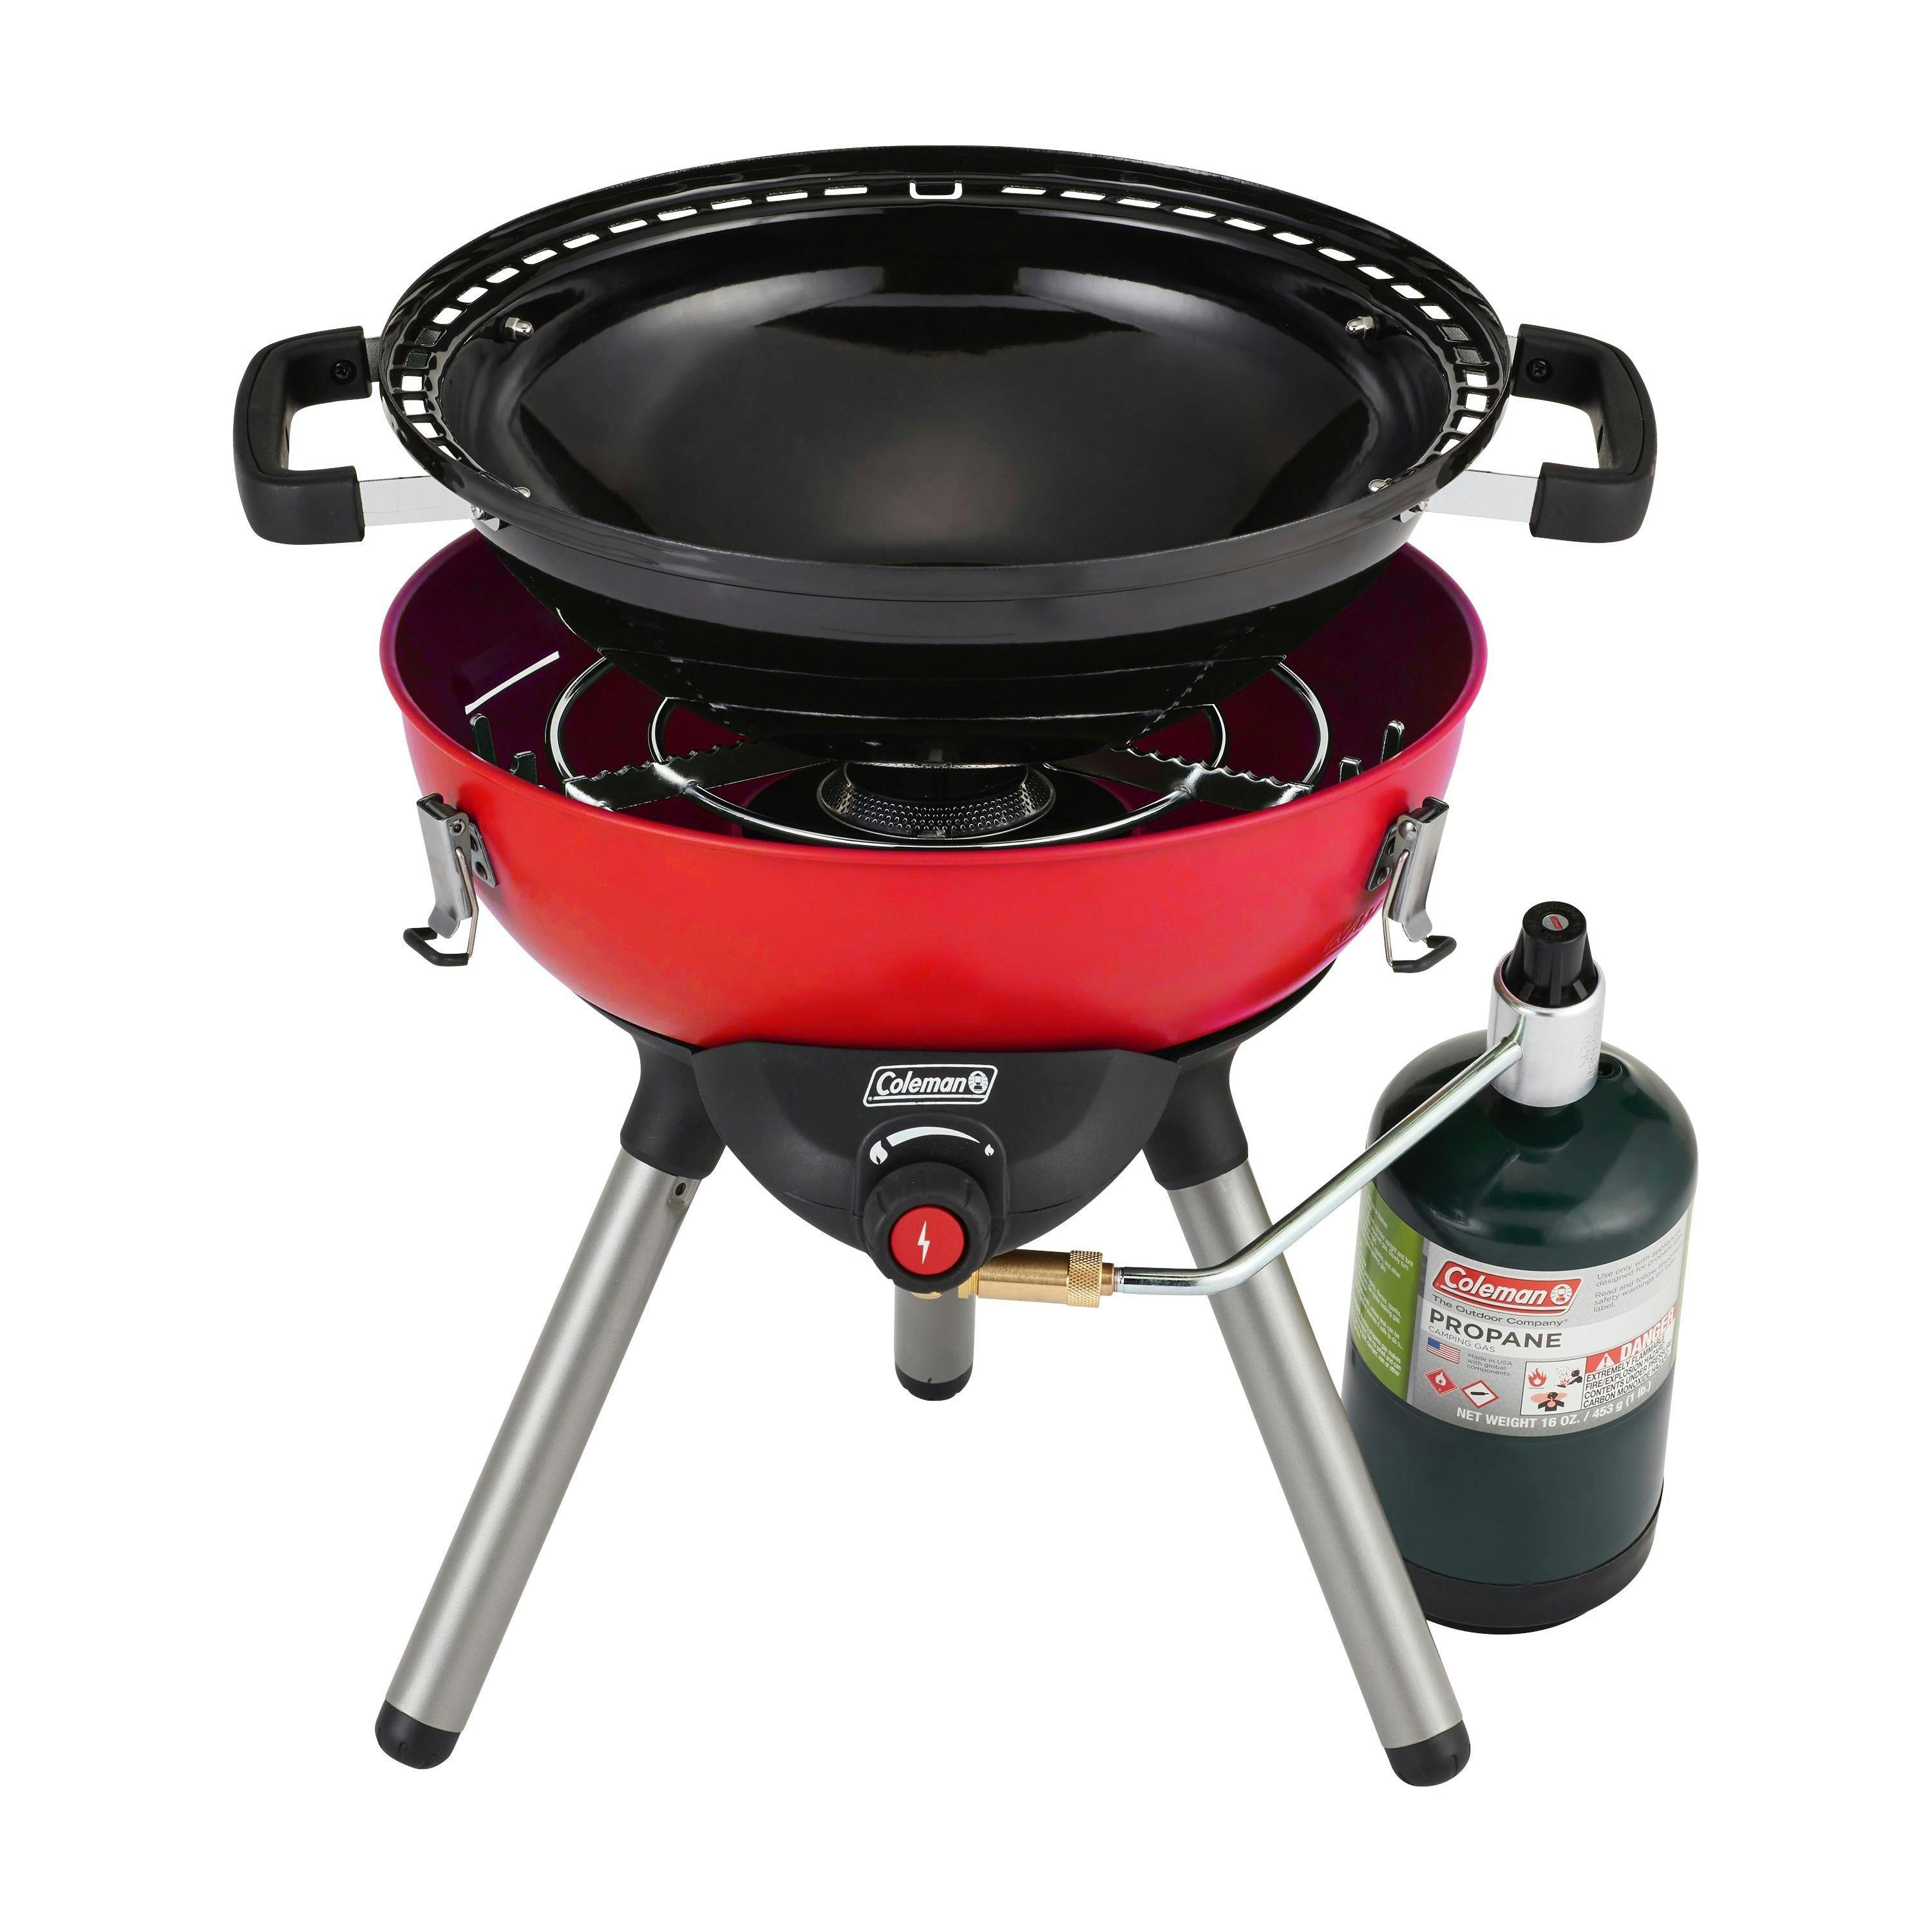  Coleman 4-in-1 Portable Propane Camping Stove, Includes Stove,  Wok, Griddle & Grill; Camping Grill with Instastart Ignition, Grease Tray,  & 7000 BTUs of Power for Camping, Tailgating, Grilling : Sports 